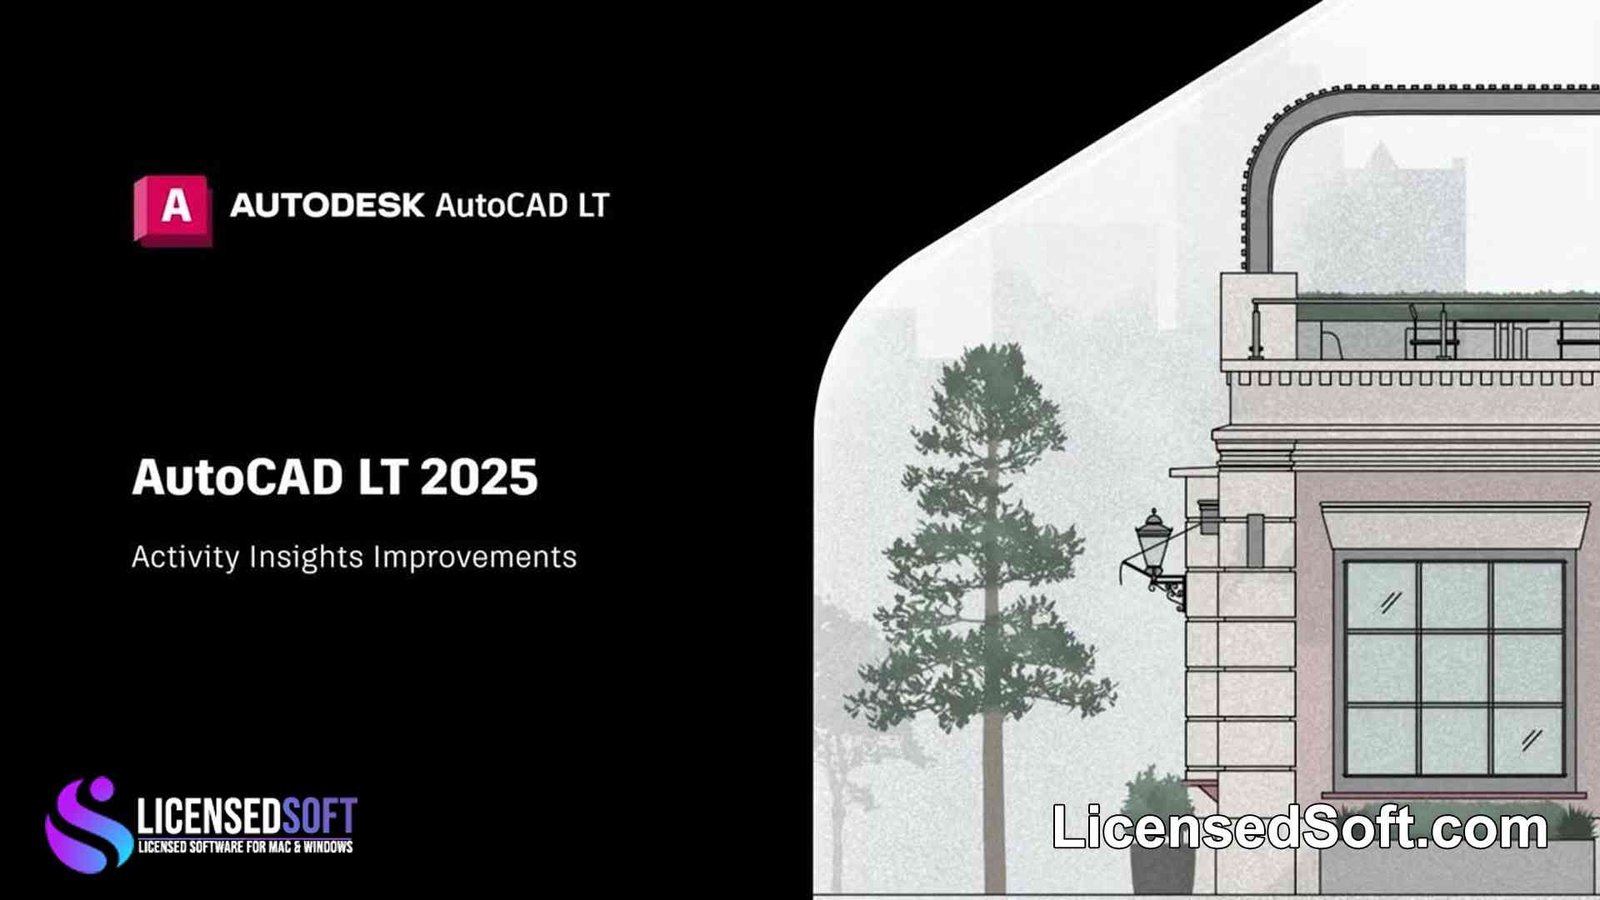 Autodesk AutoCAD LT 2025 Perpetual License By LicensedSoft